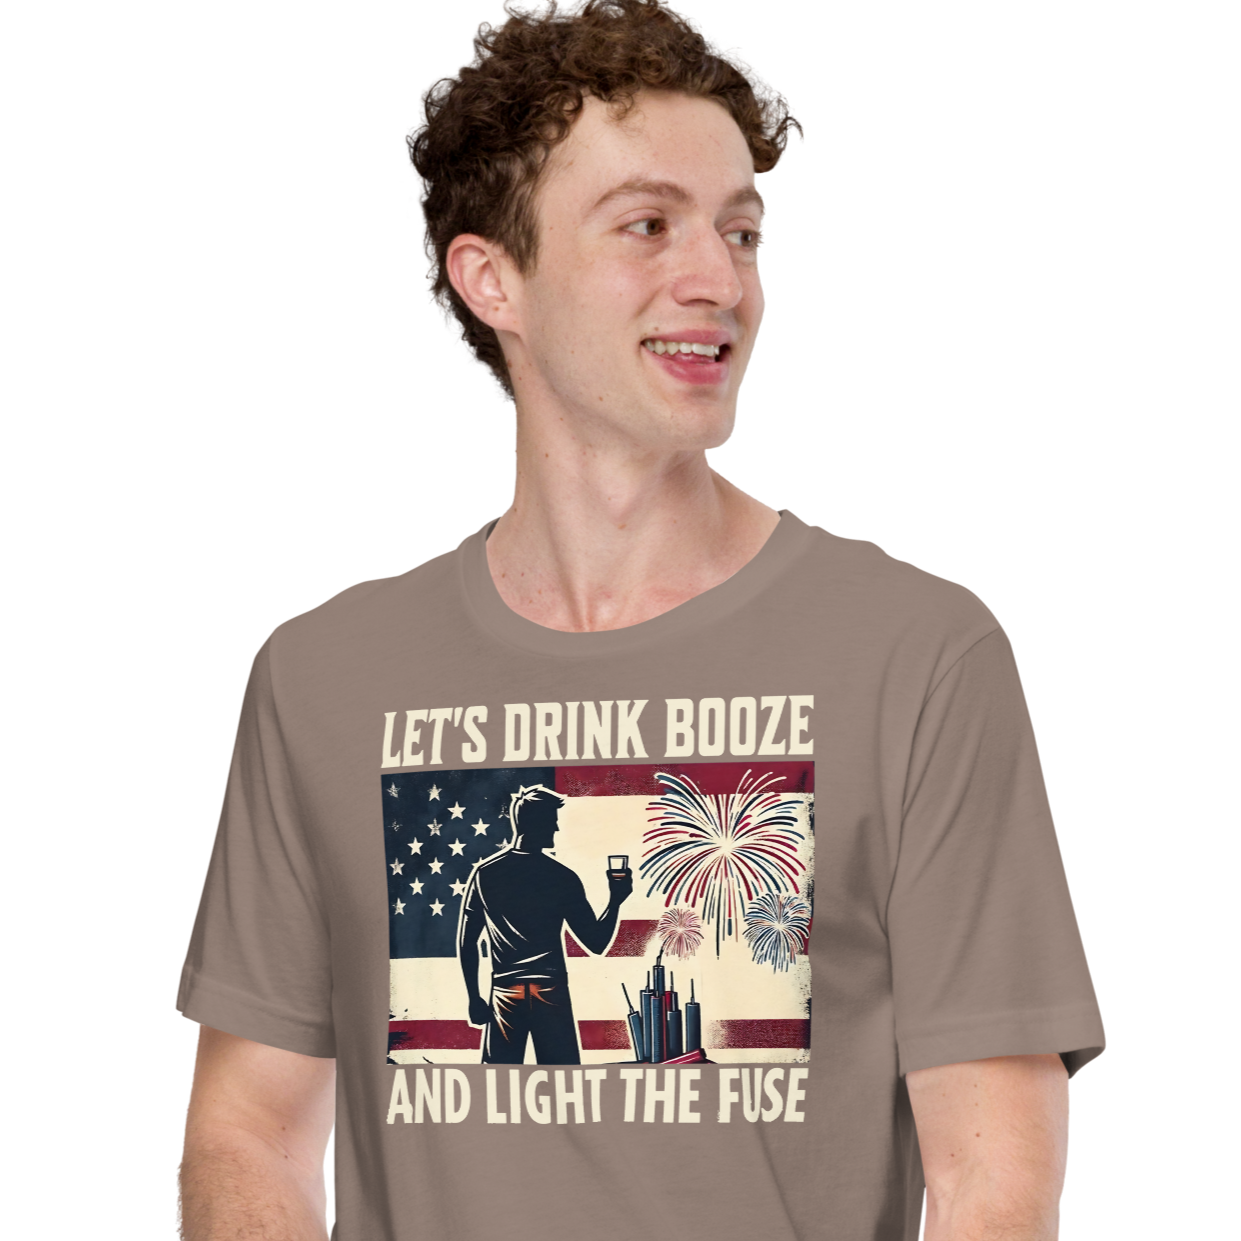 4th of July T-shirt with 'Let's Drink Booze and Light the Fuse' text, featuring a festive, patriotic theme